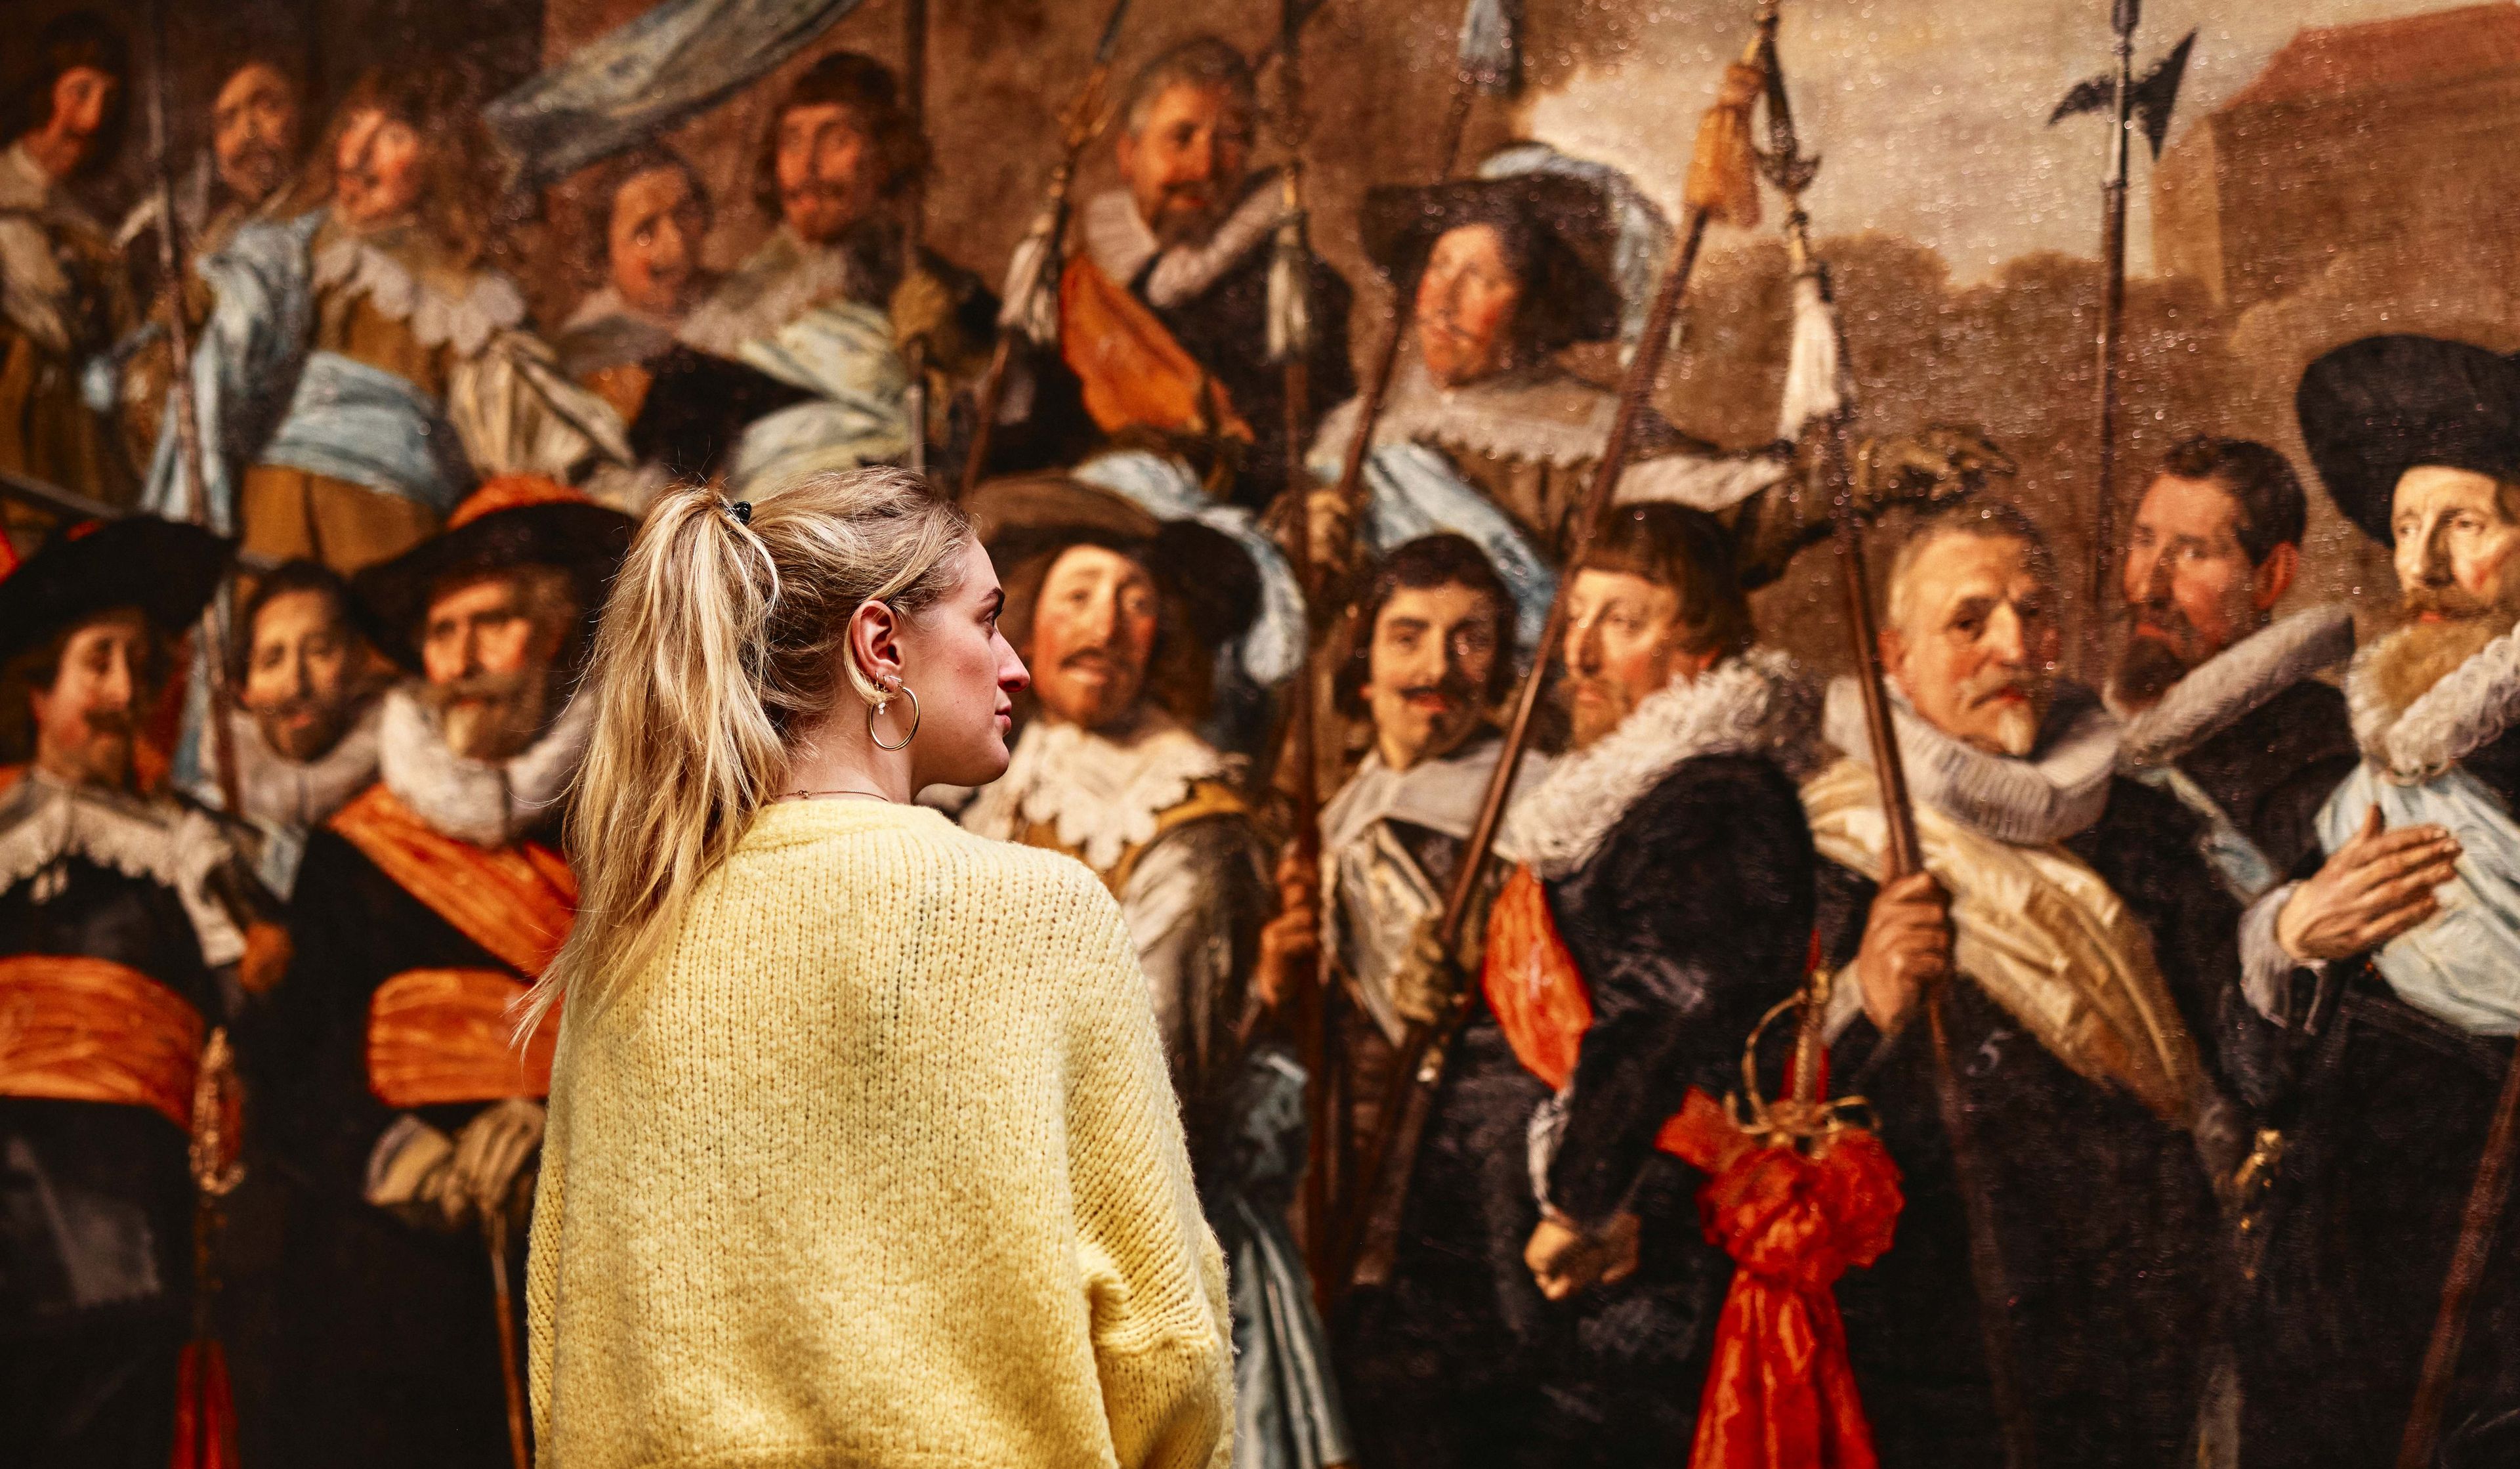 Visitor looking at a group portrait of civic guards by Frans Hals.